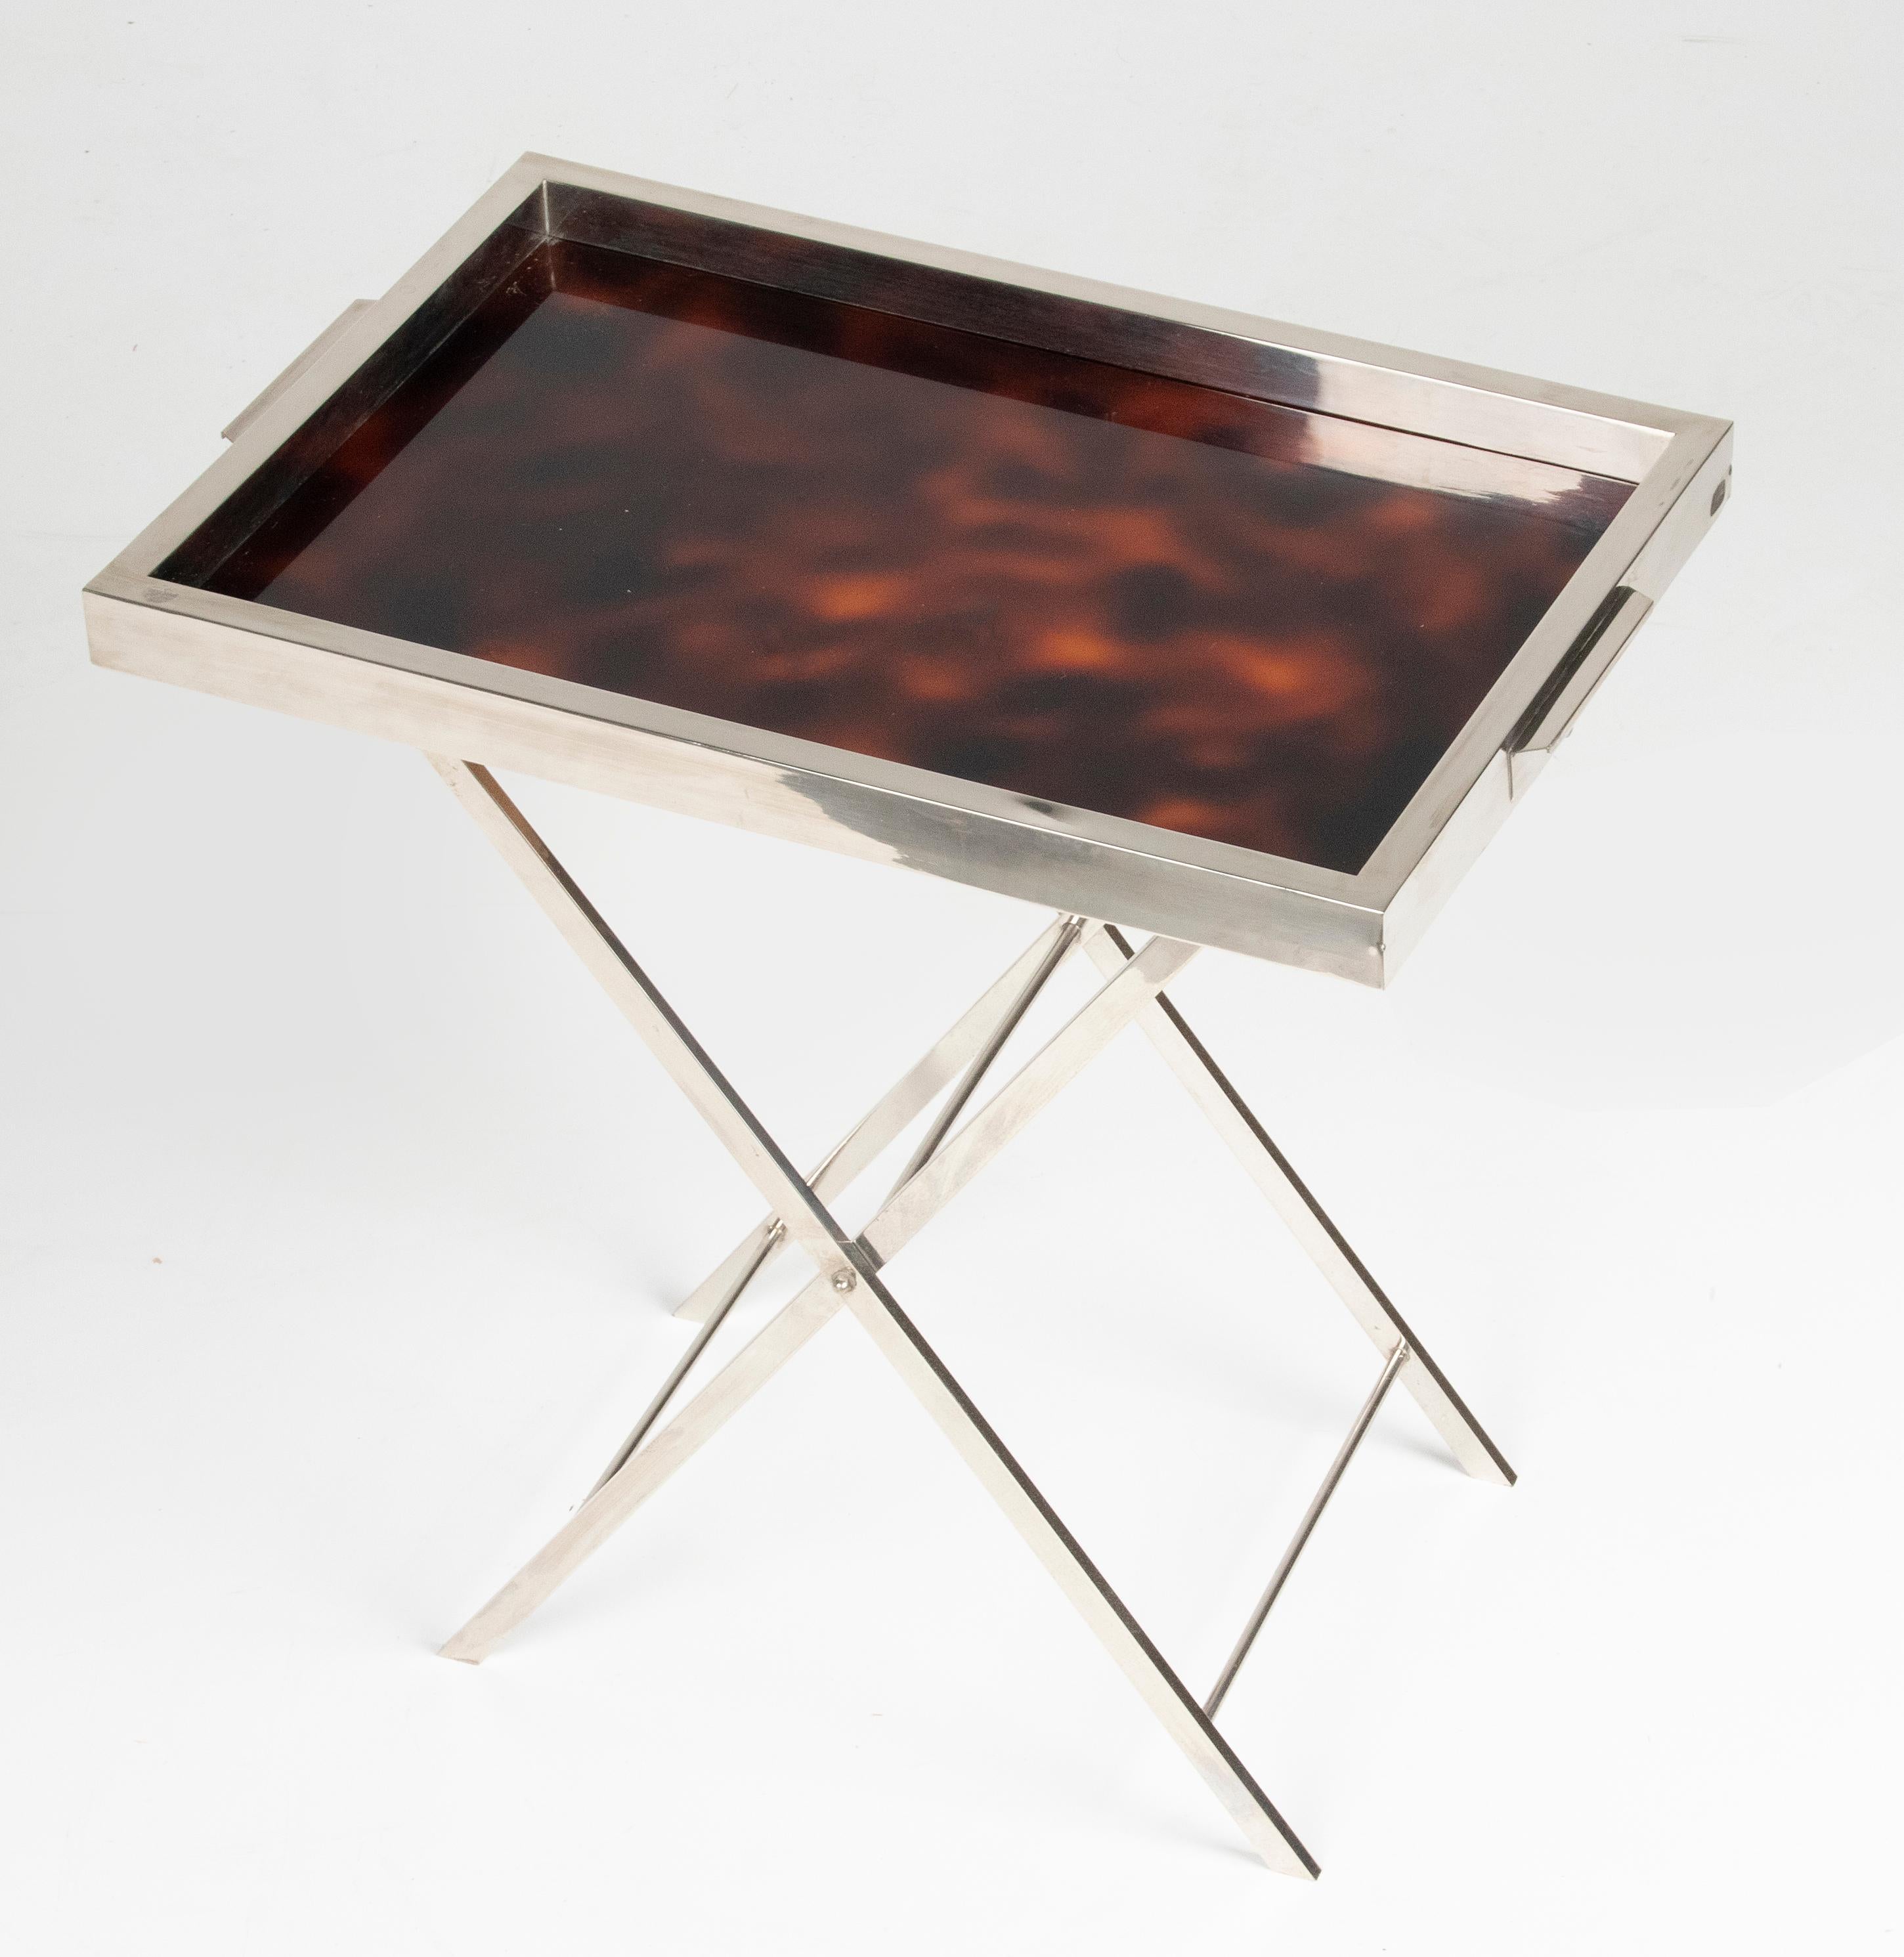 Beautiful serving table from the French Art Deco period. The table has a sleek design, and a beautiful combination of shiny chrome and imitation tortoiseshell. The base of the table is foldable, so only the tray can be used as well. Point of